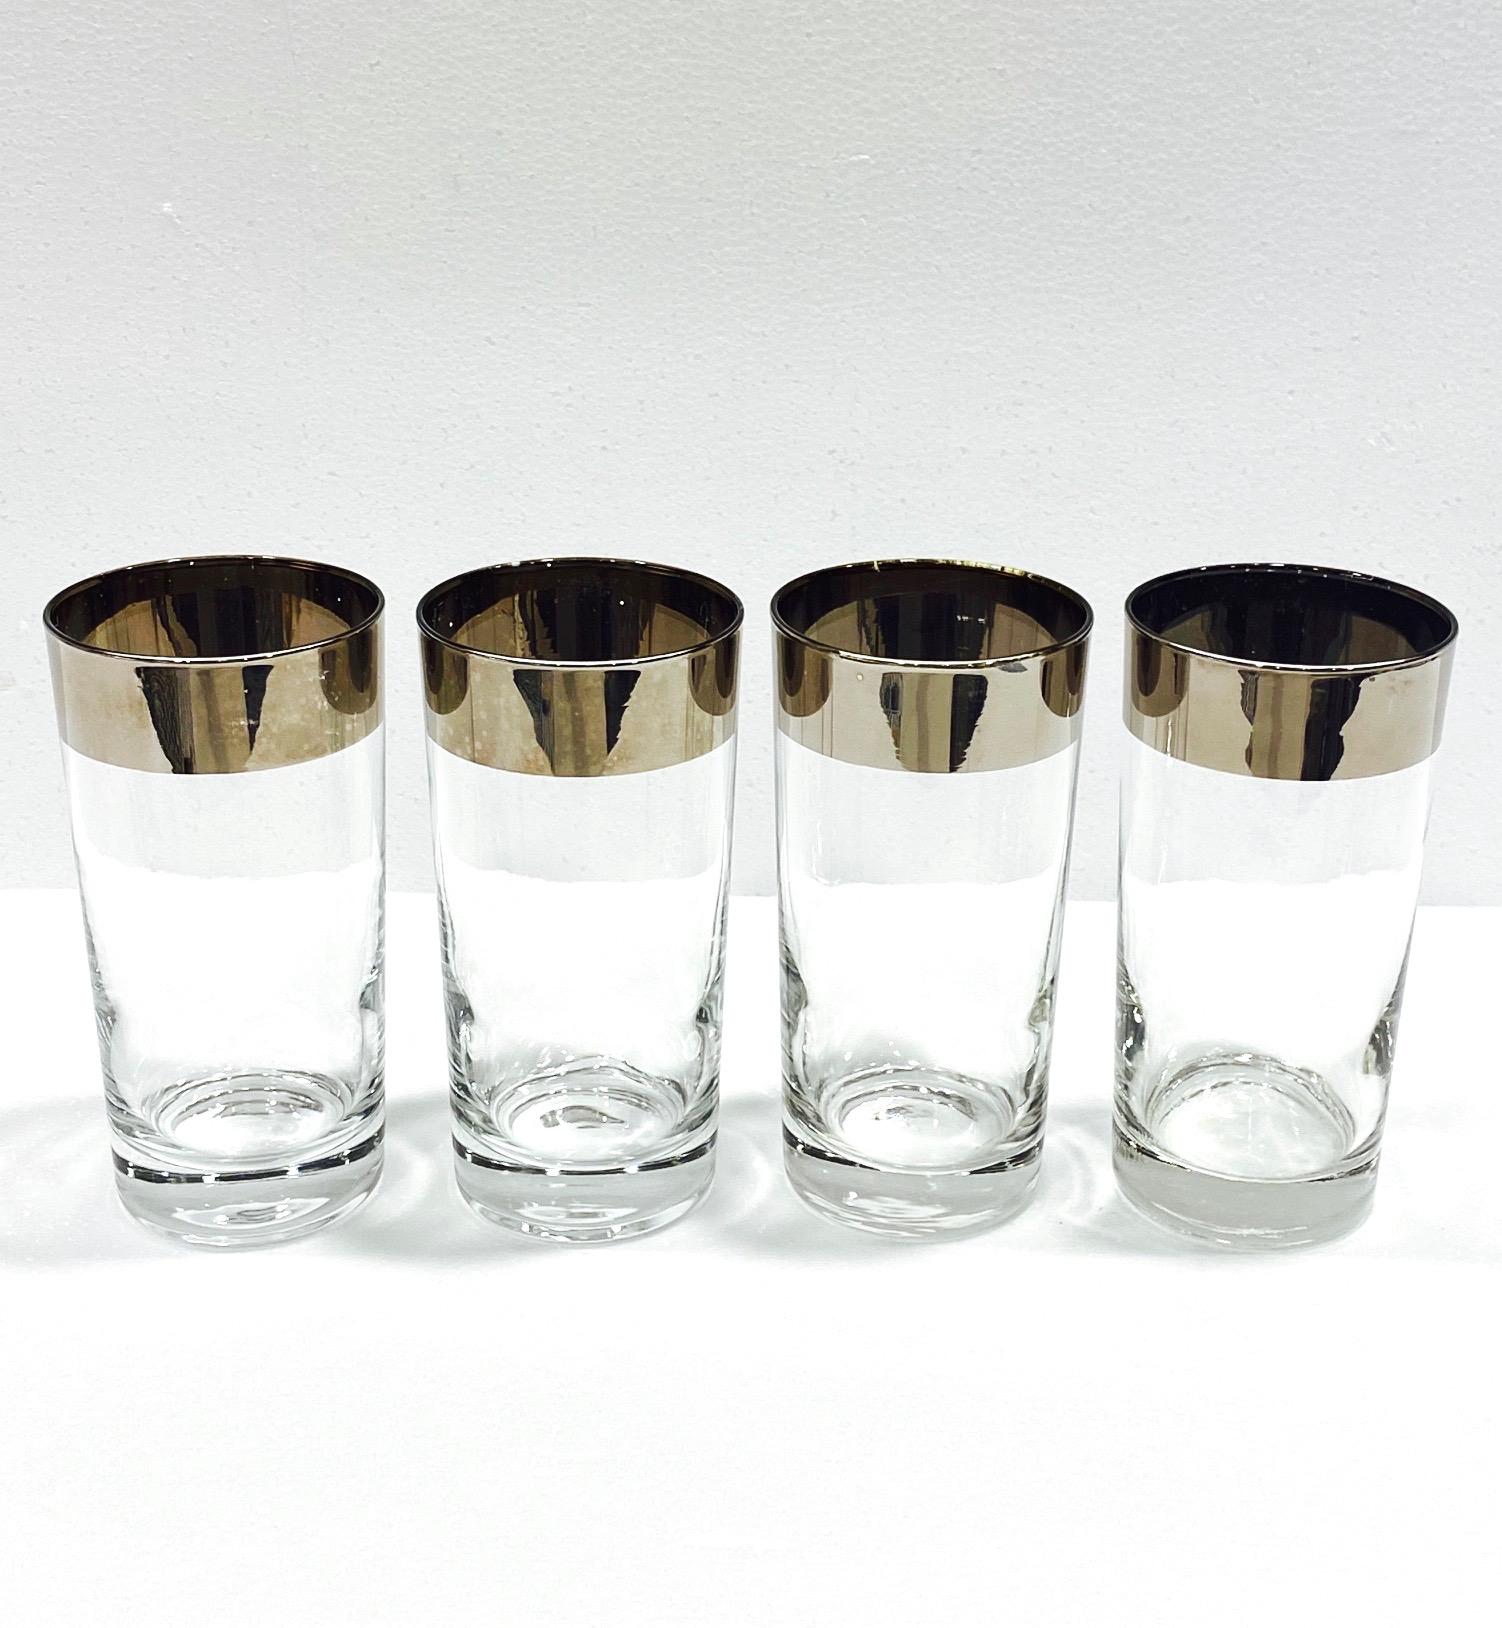 American Set of Four Dorothy Thorpe Midcentury Barware Glasses with Silver Overlay, 1960